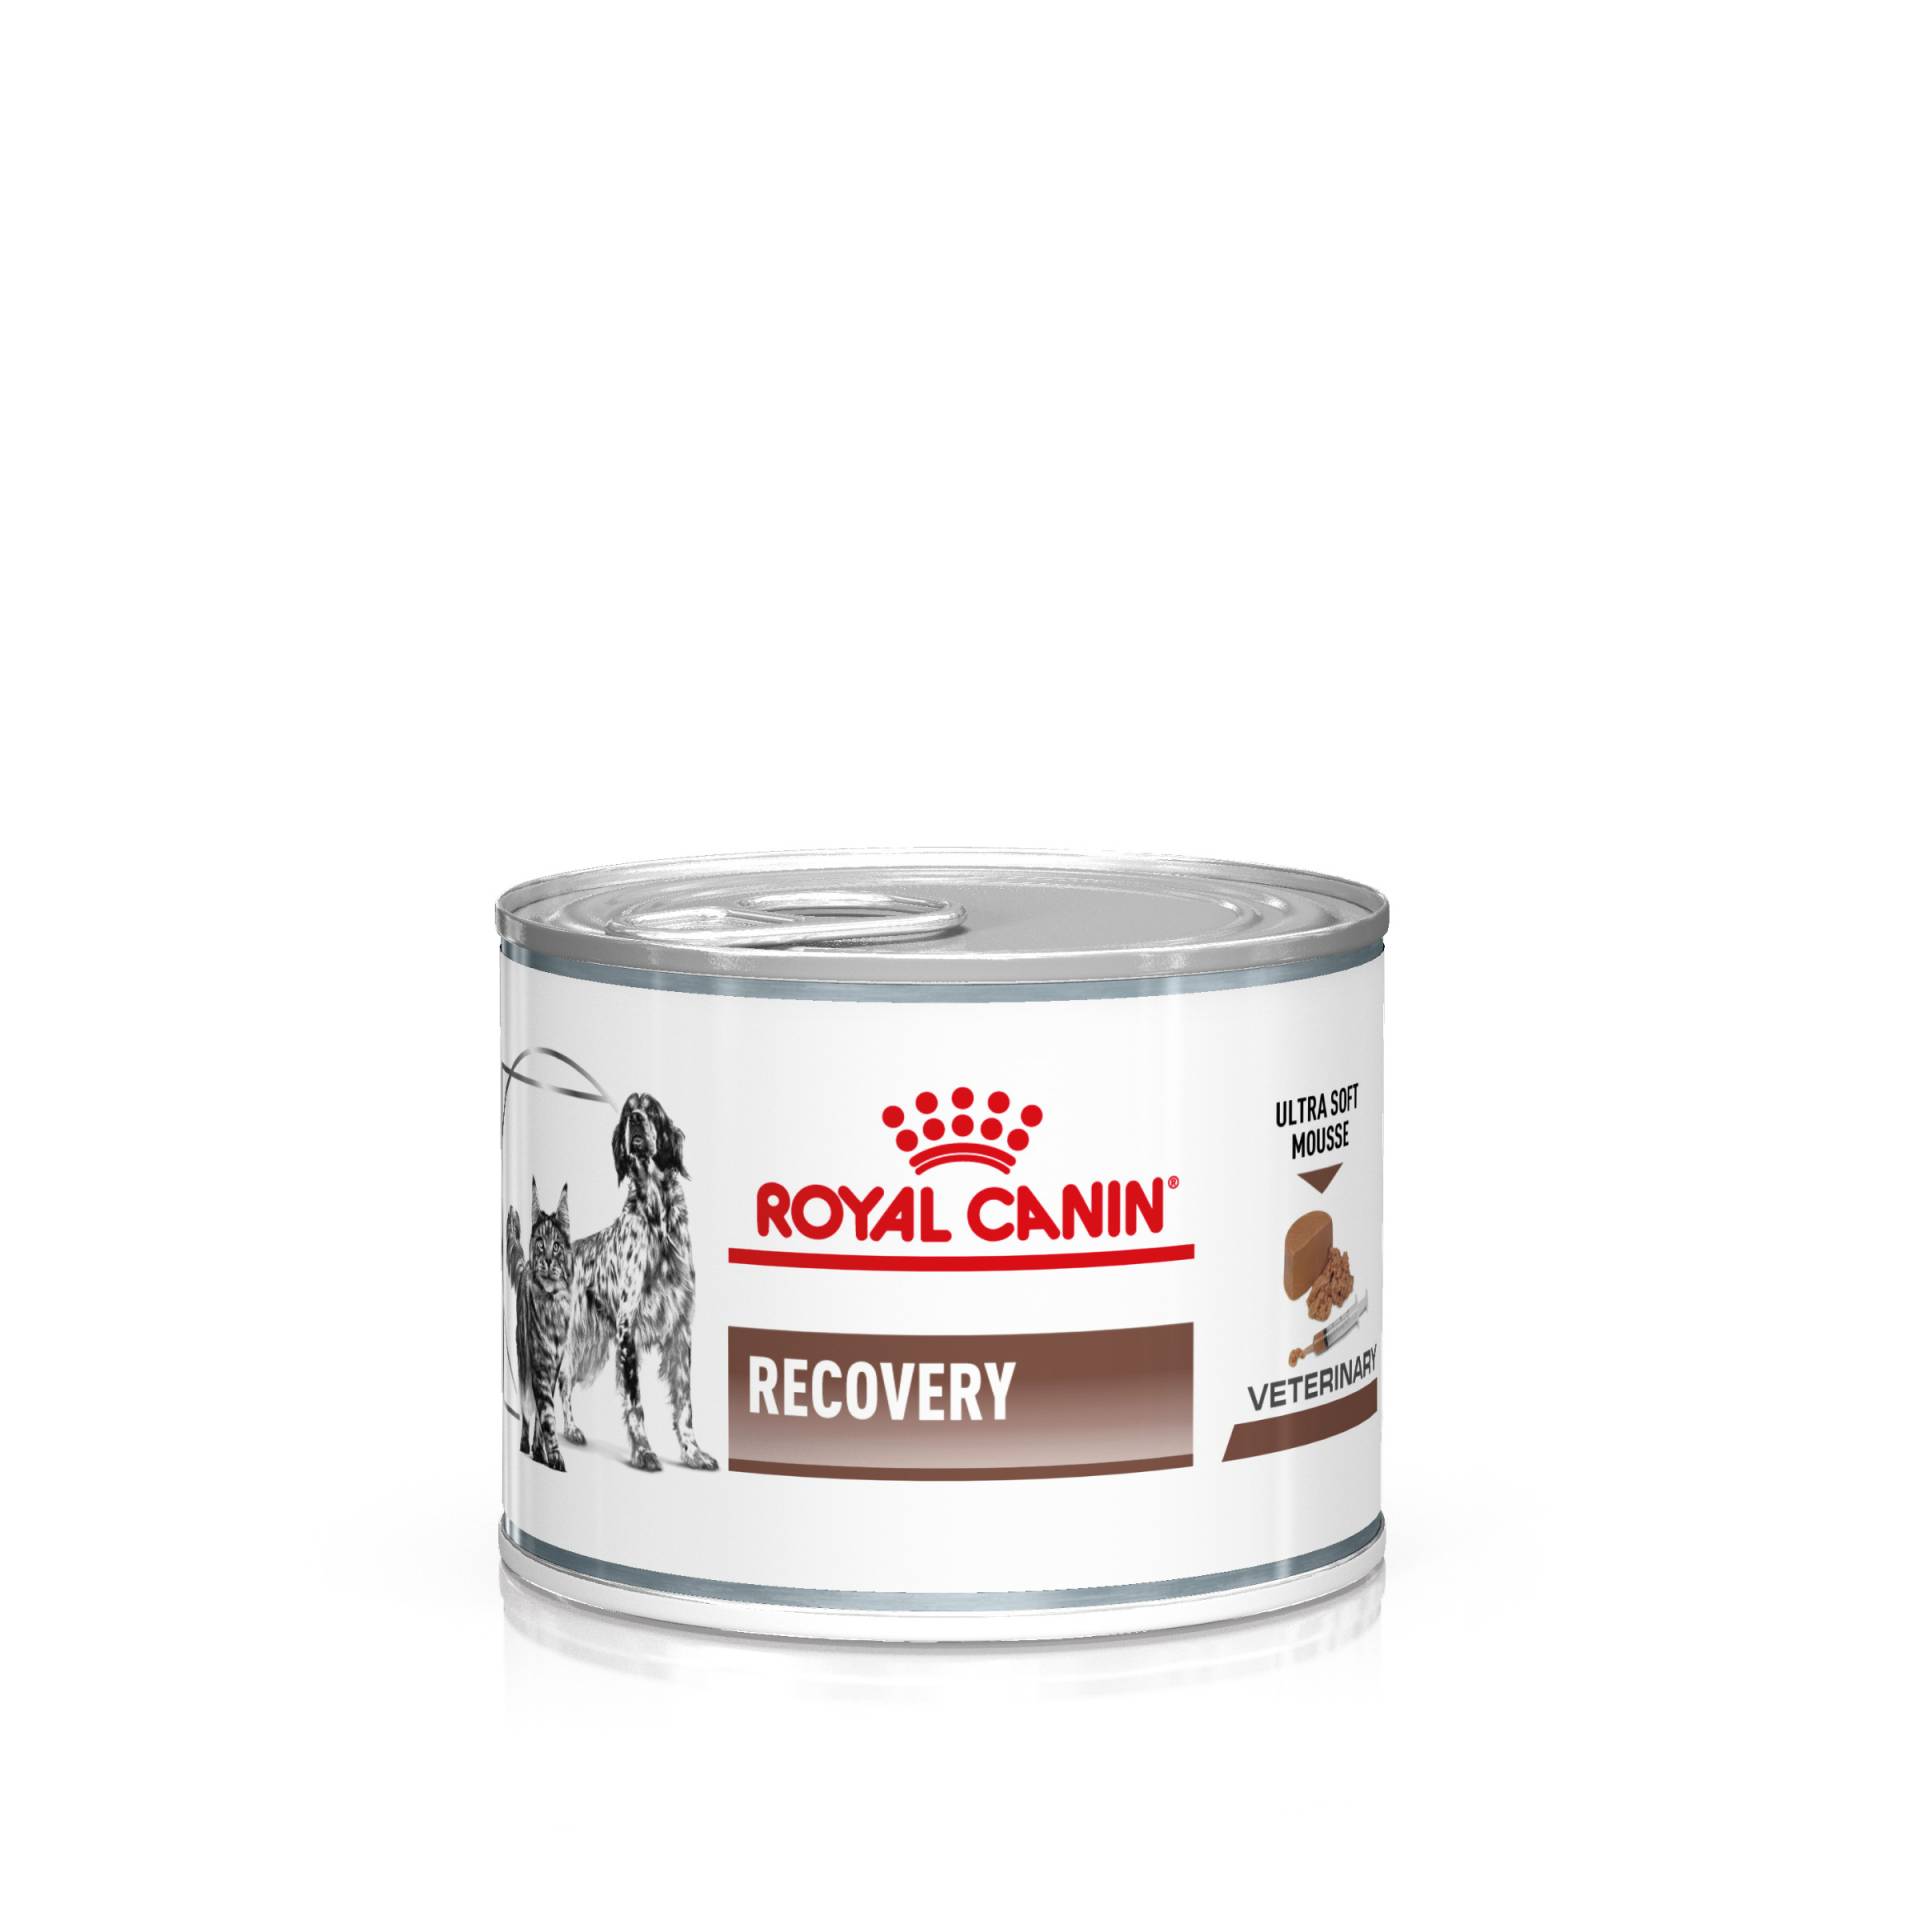 Royal Canin Veterinary Canine Recovery - 24 x 195 g von Royal Canin Veterinary Diet